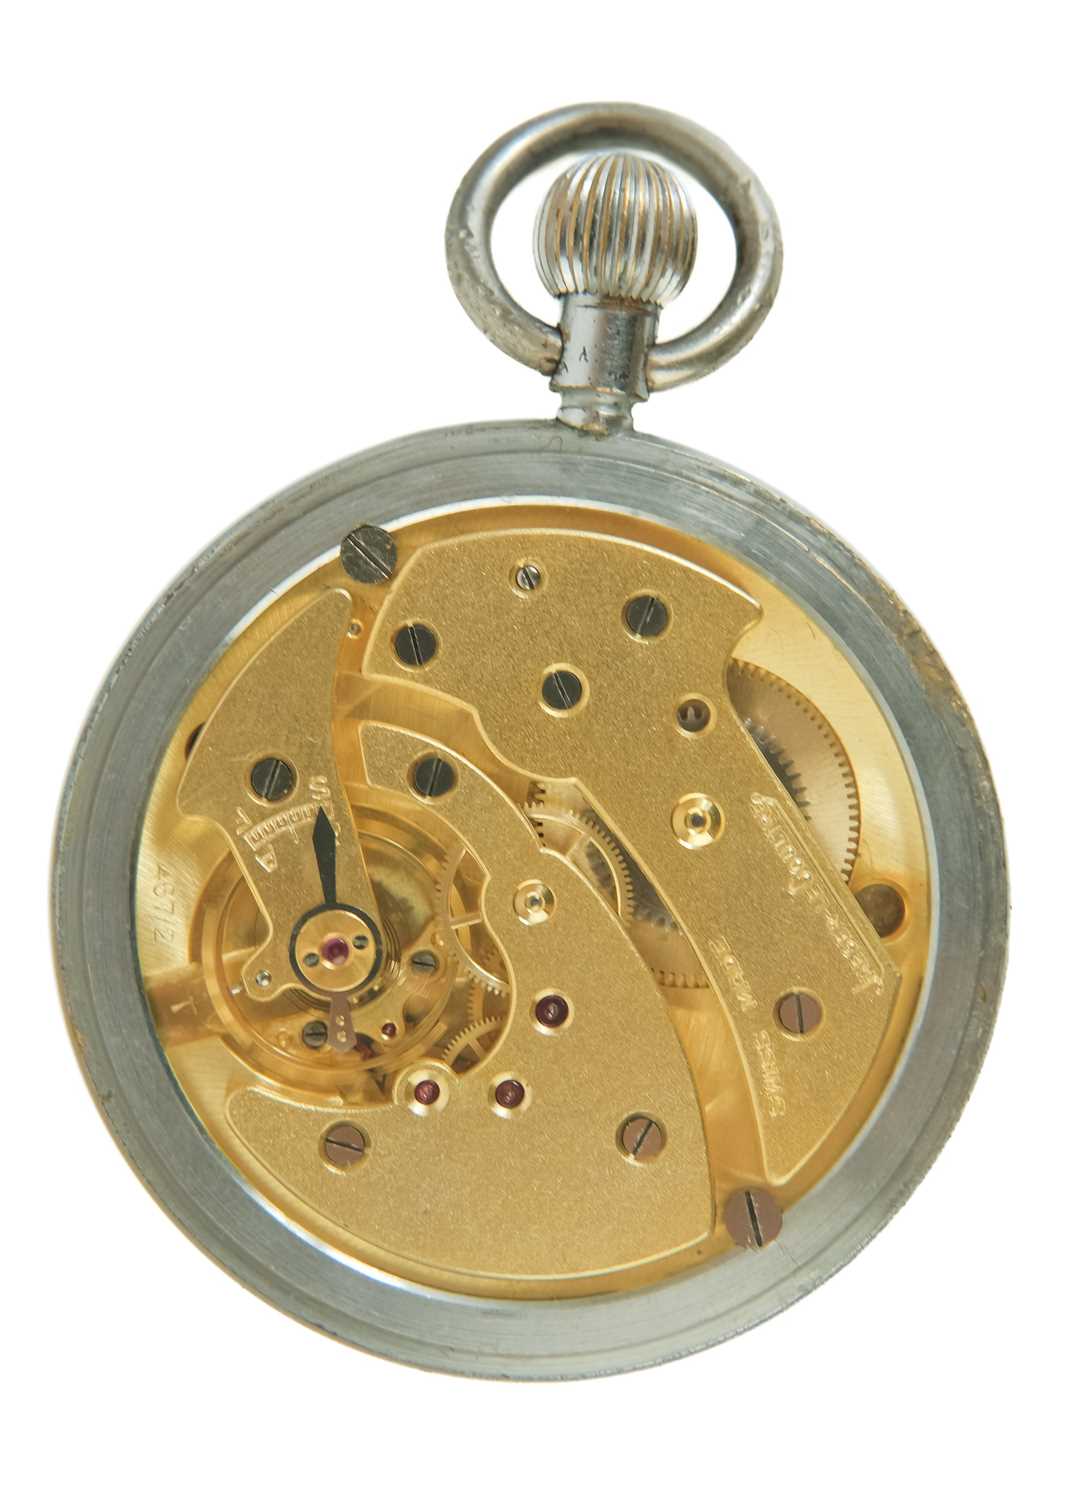 JAEGER-LECOULTRE - A British Military issue nickel-cased crown wind pocket lever watch. - Image 3 of 5